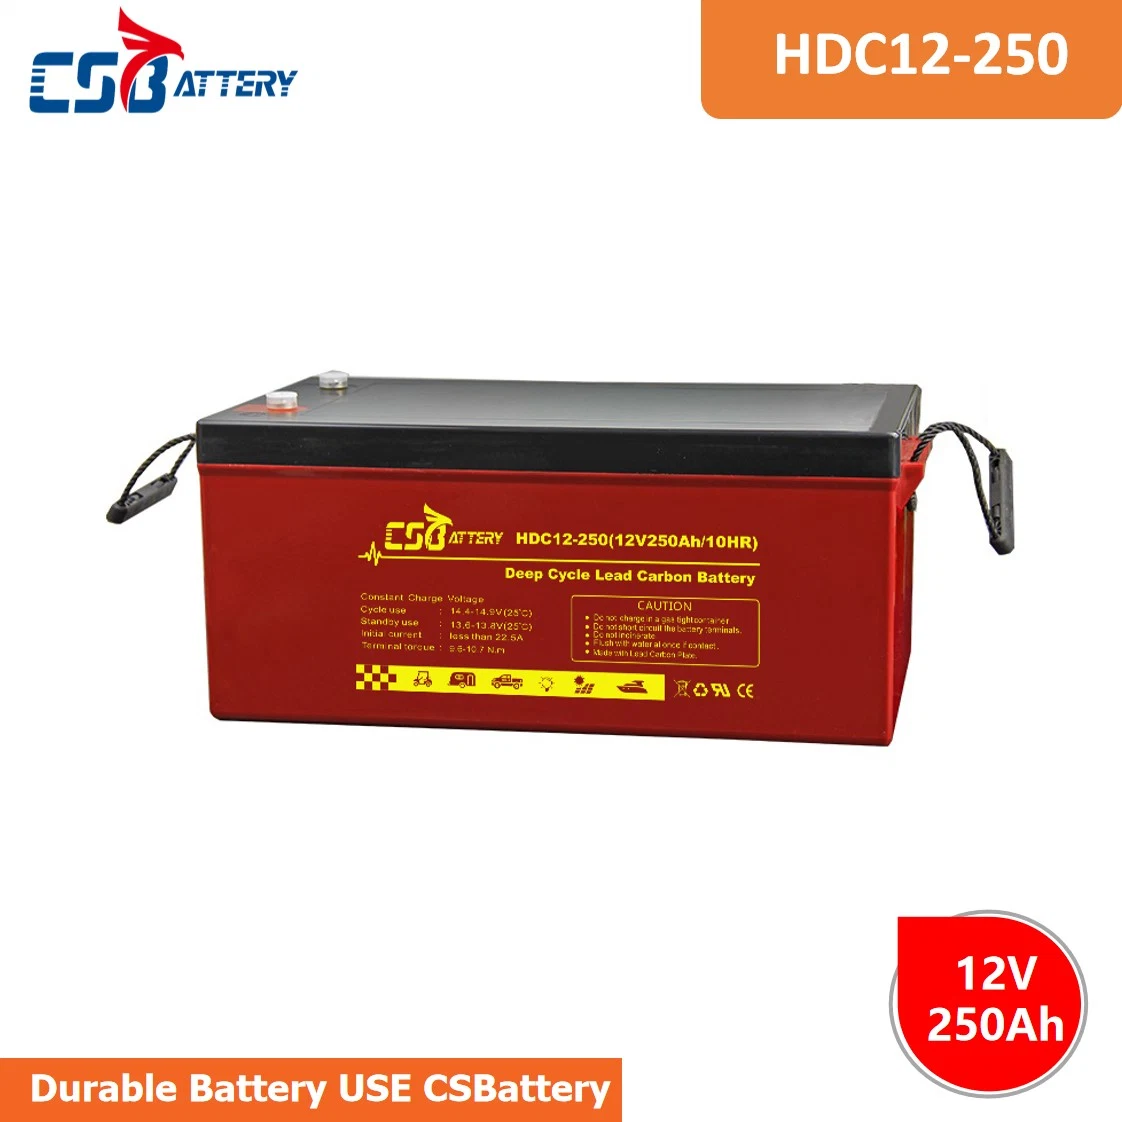 Csbattery 6V420ah Trojan Quality Deep Cycle Lead Carbon Battery for Solar/Inverter/Power-Tool/Electric-Scooter/Bicycle/Vehicle/CSR